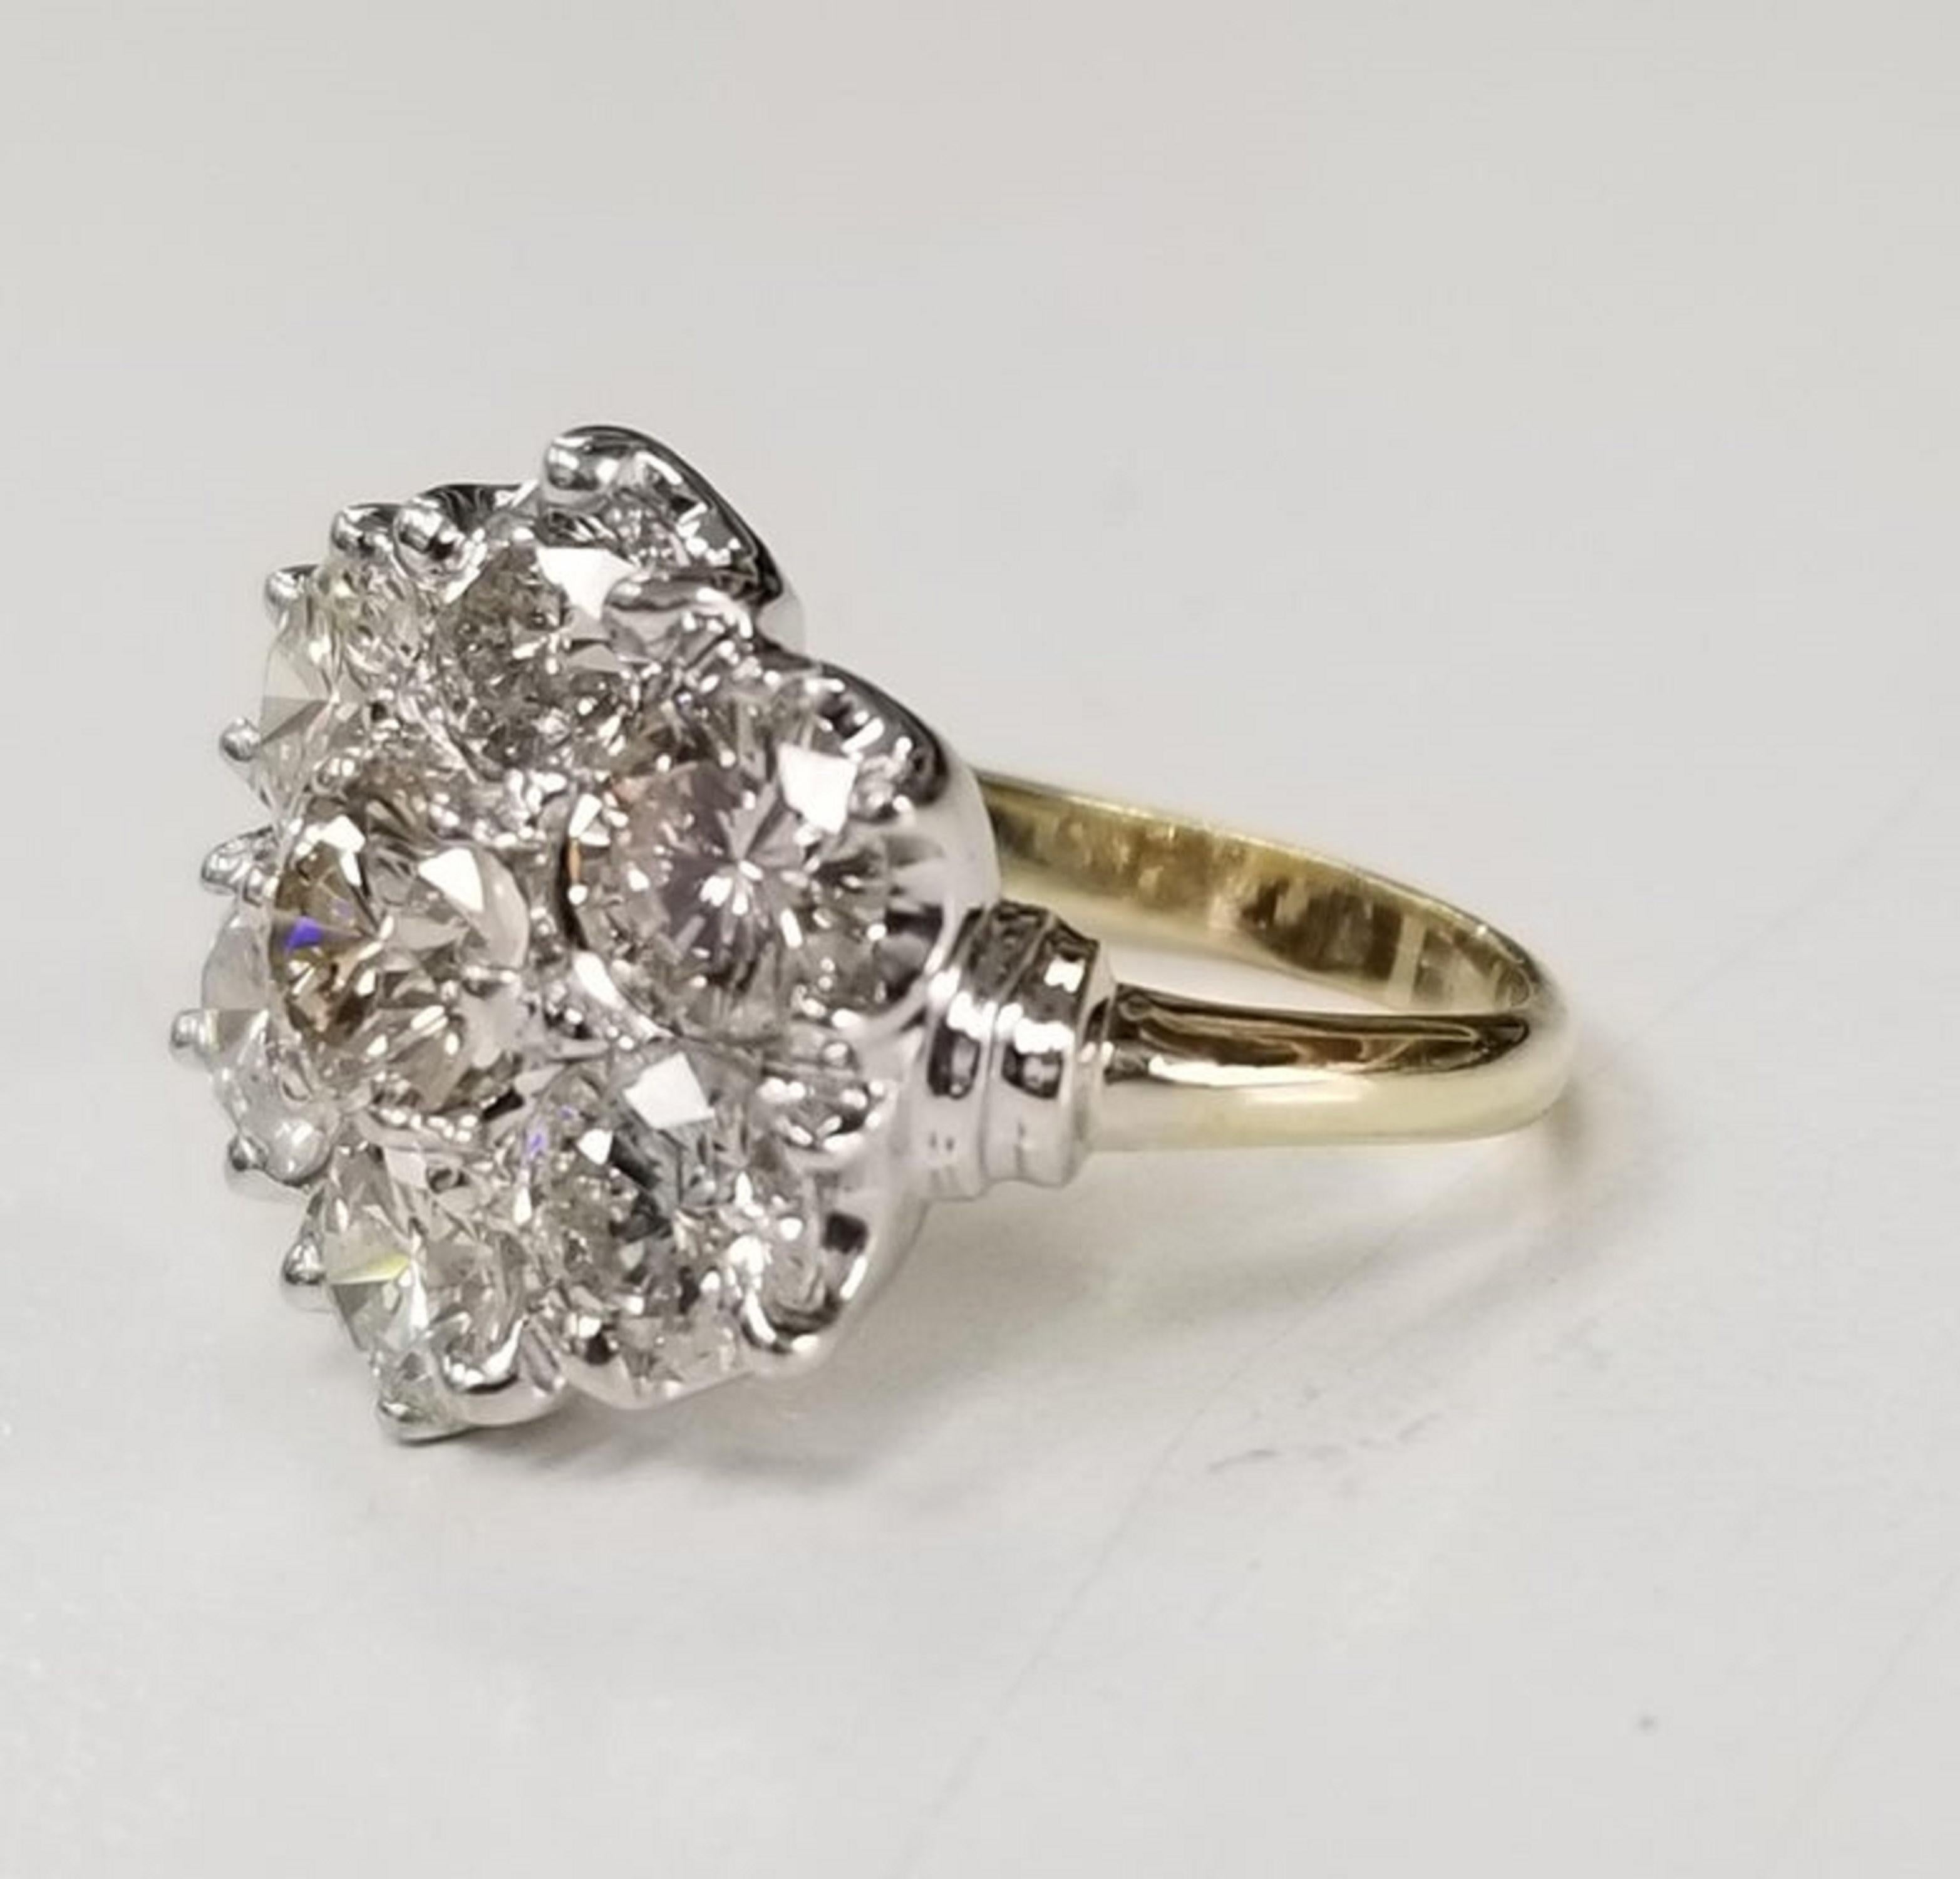 14k yellow and white gold diamond cluster ring containing 7 brilliant cut diamonds: color G-H, clarity vs2-SI1 and weight 3.01cts.  This ring is a size 5.25 but we will size to fit for free.